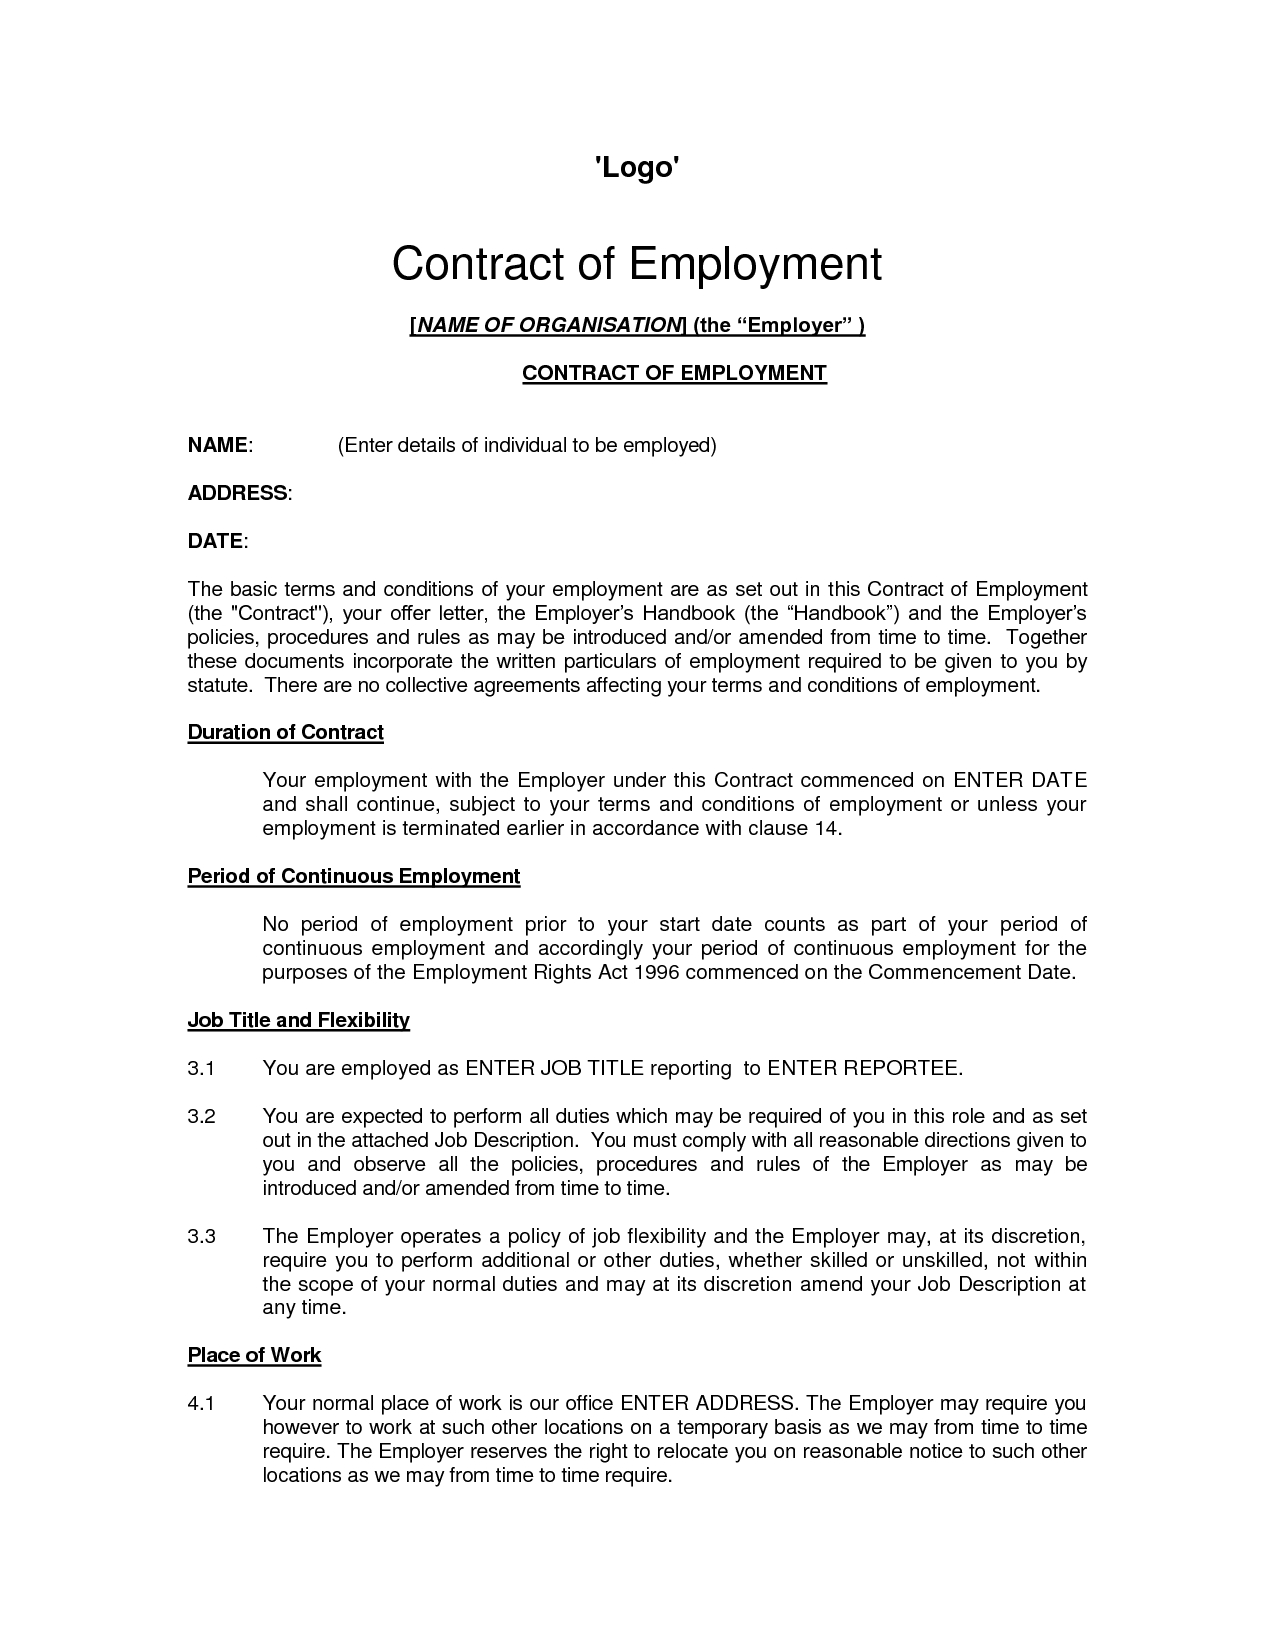 Government jobs on contract basis